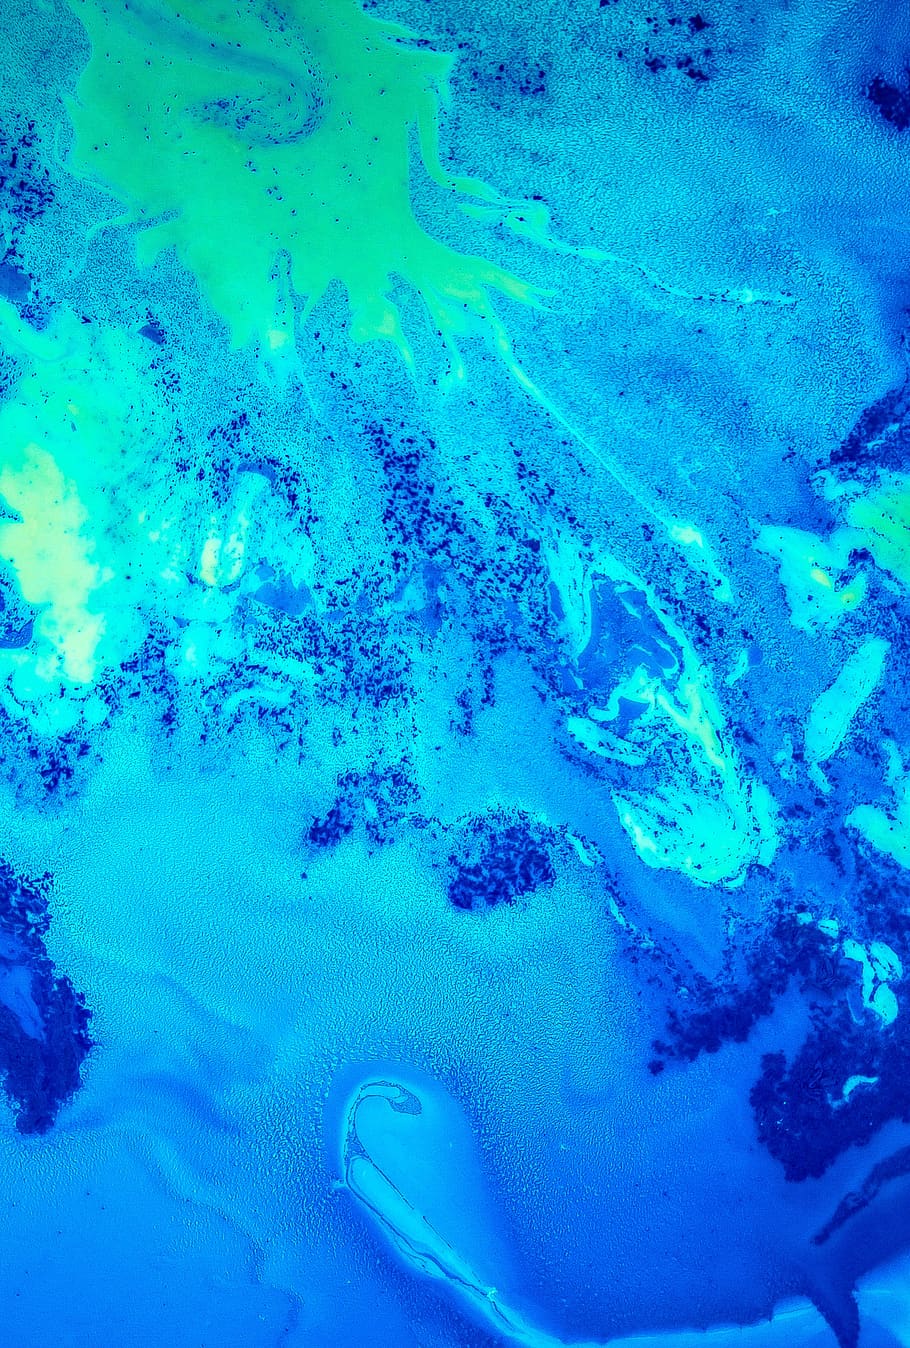 water, blue, green, spill, abstract, indoors, full frame, sea, backgrounds, close-up